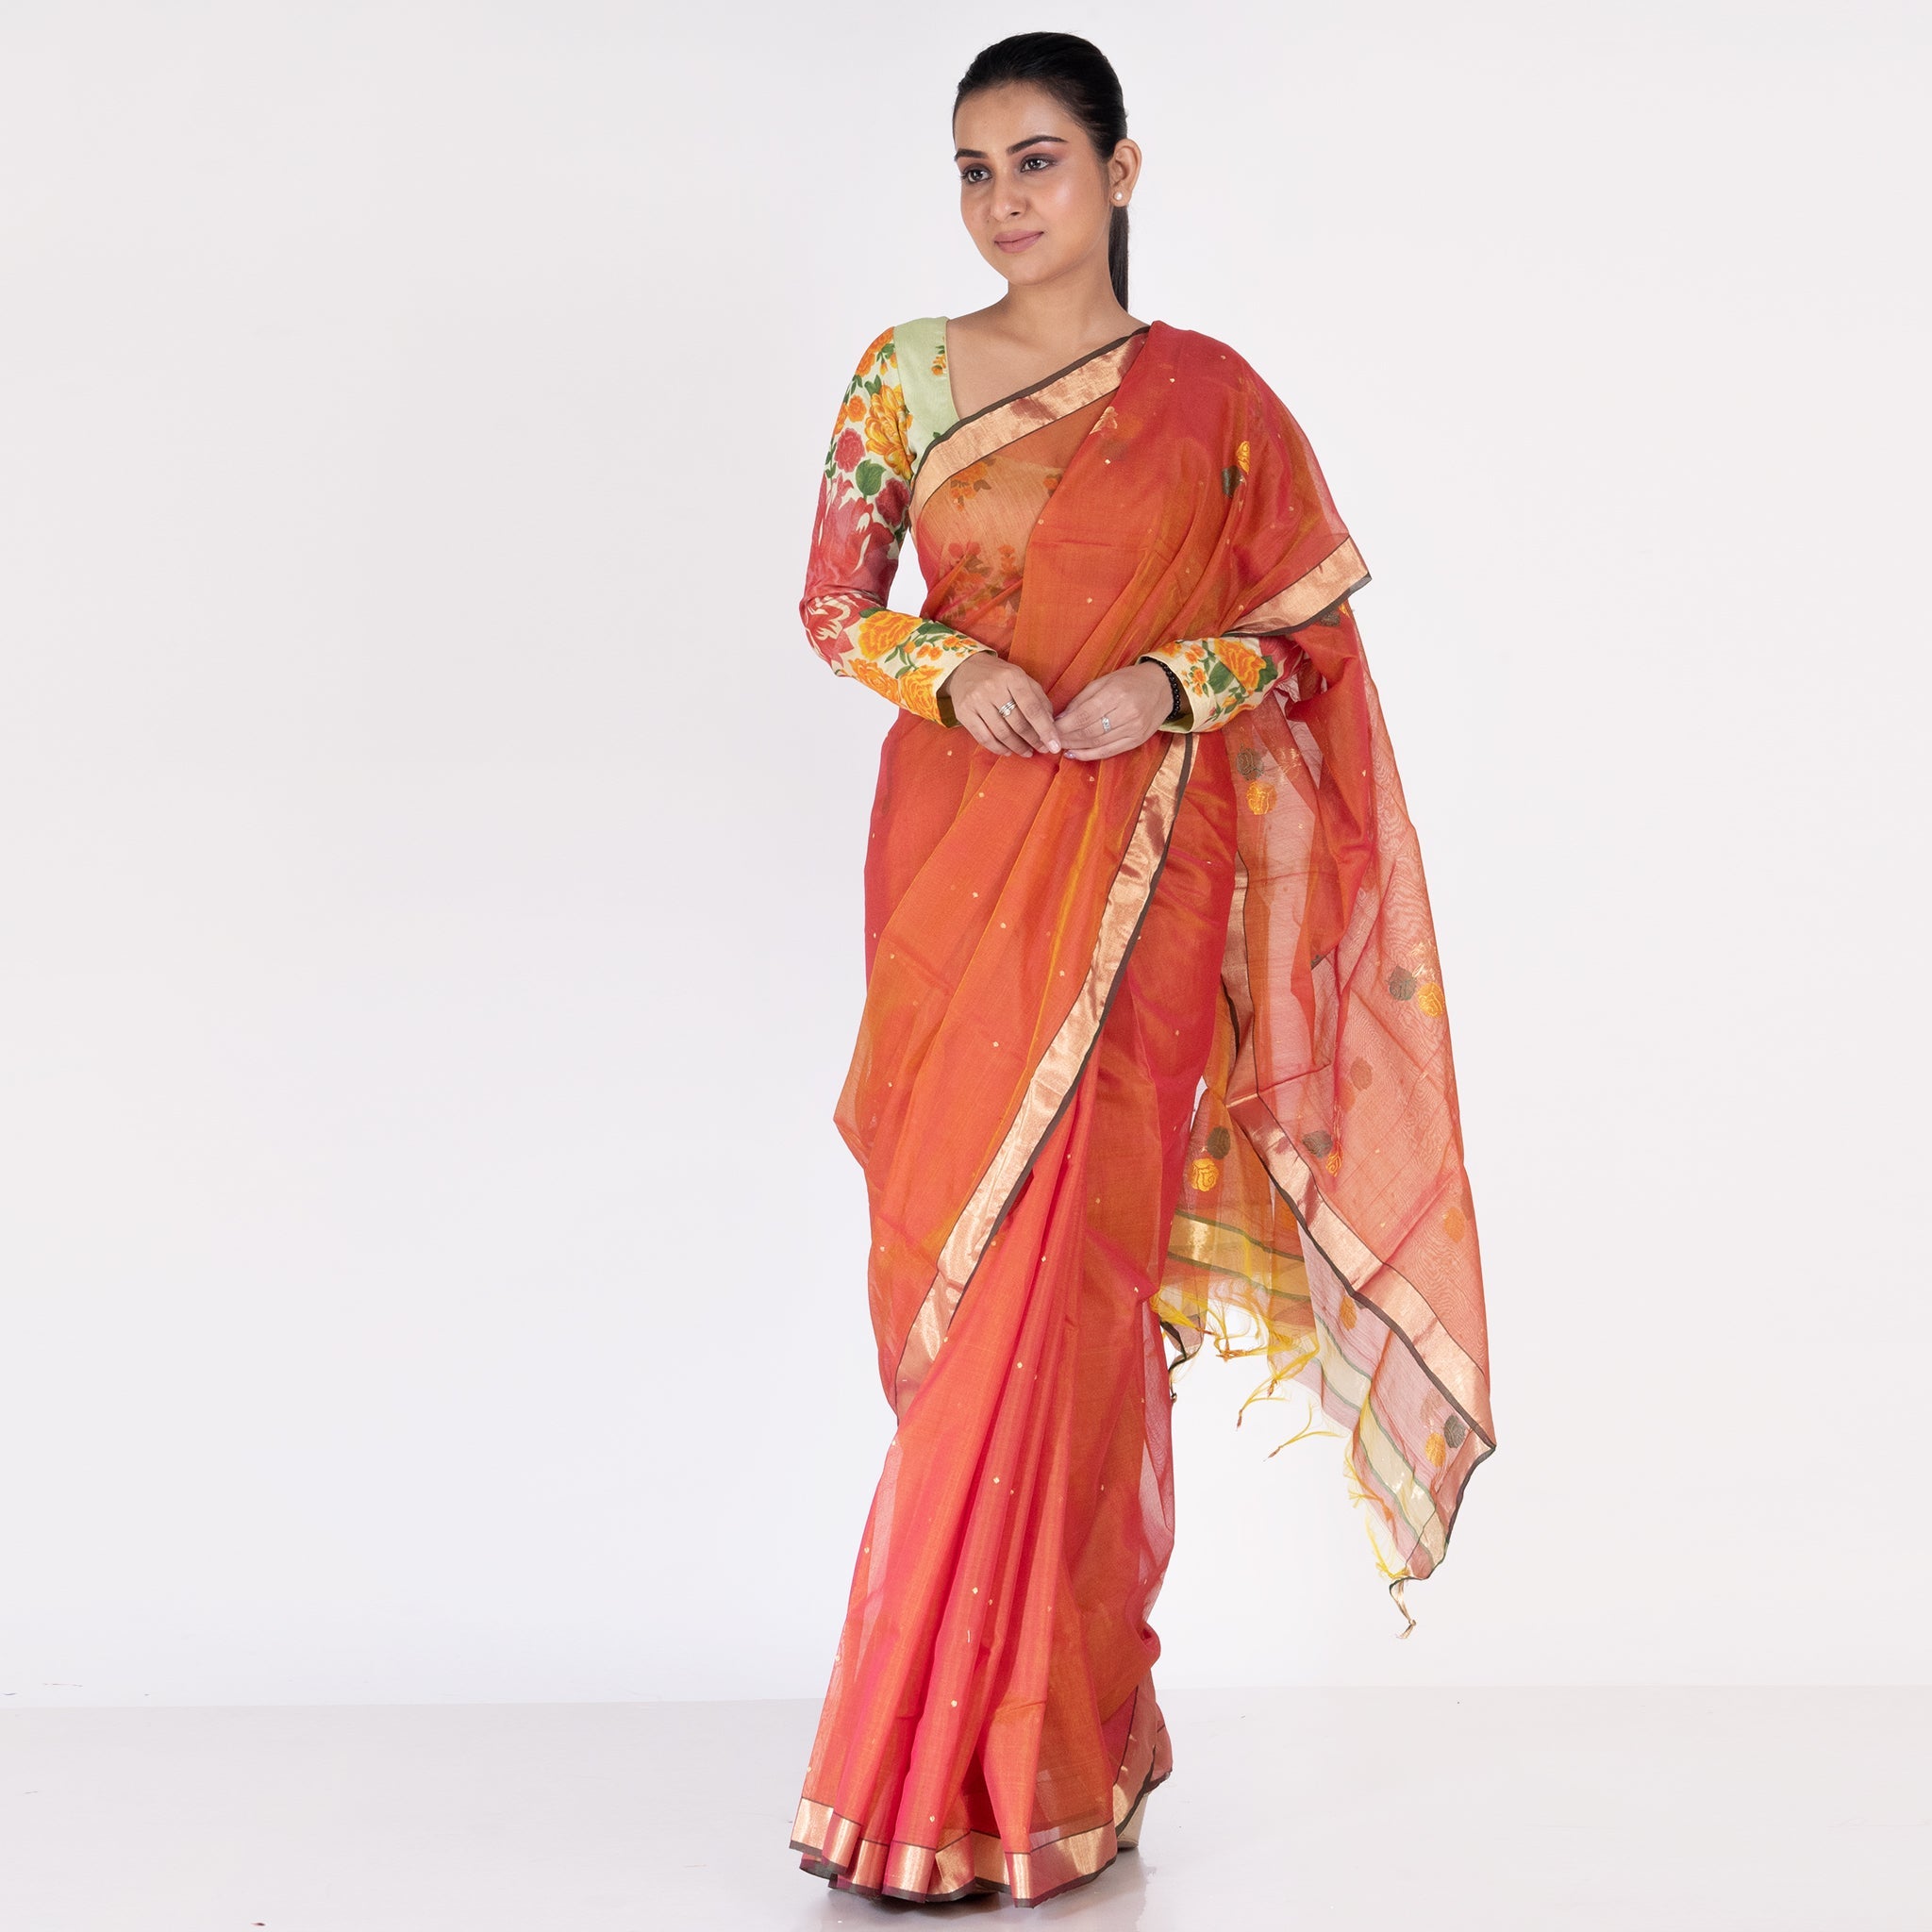 Women's Rust Pure Chanderi Silk Saree With Floral Motifs And Border Pallu - Boveee